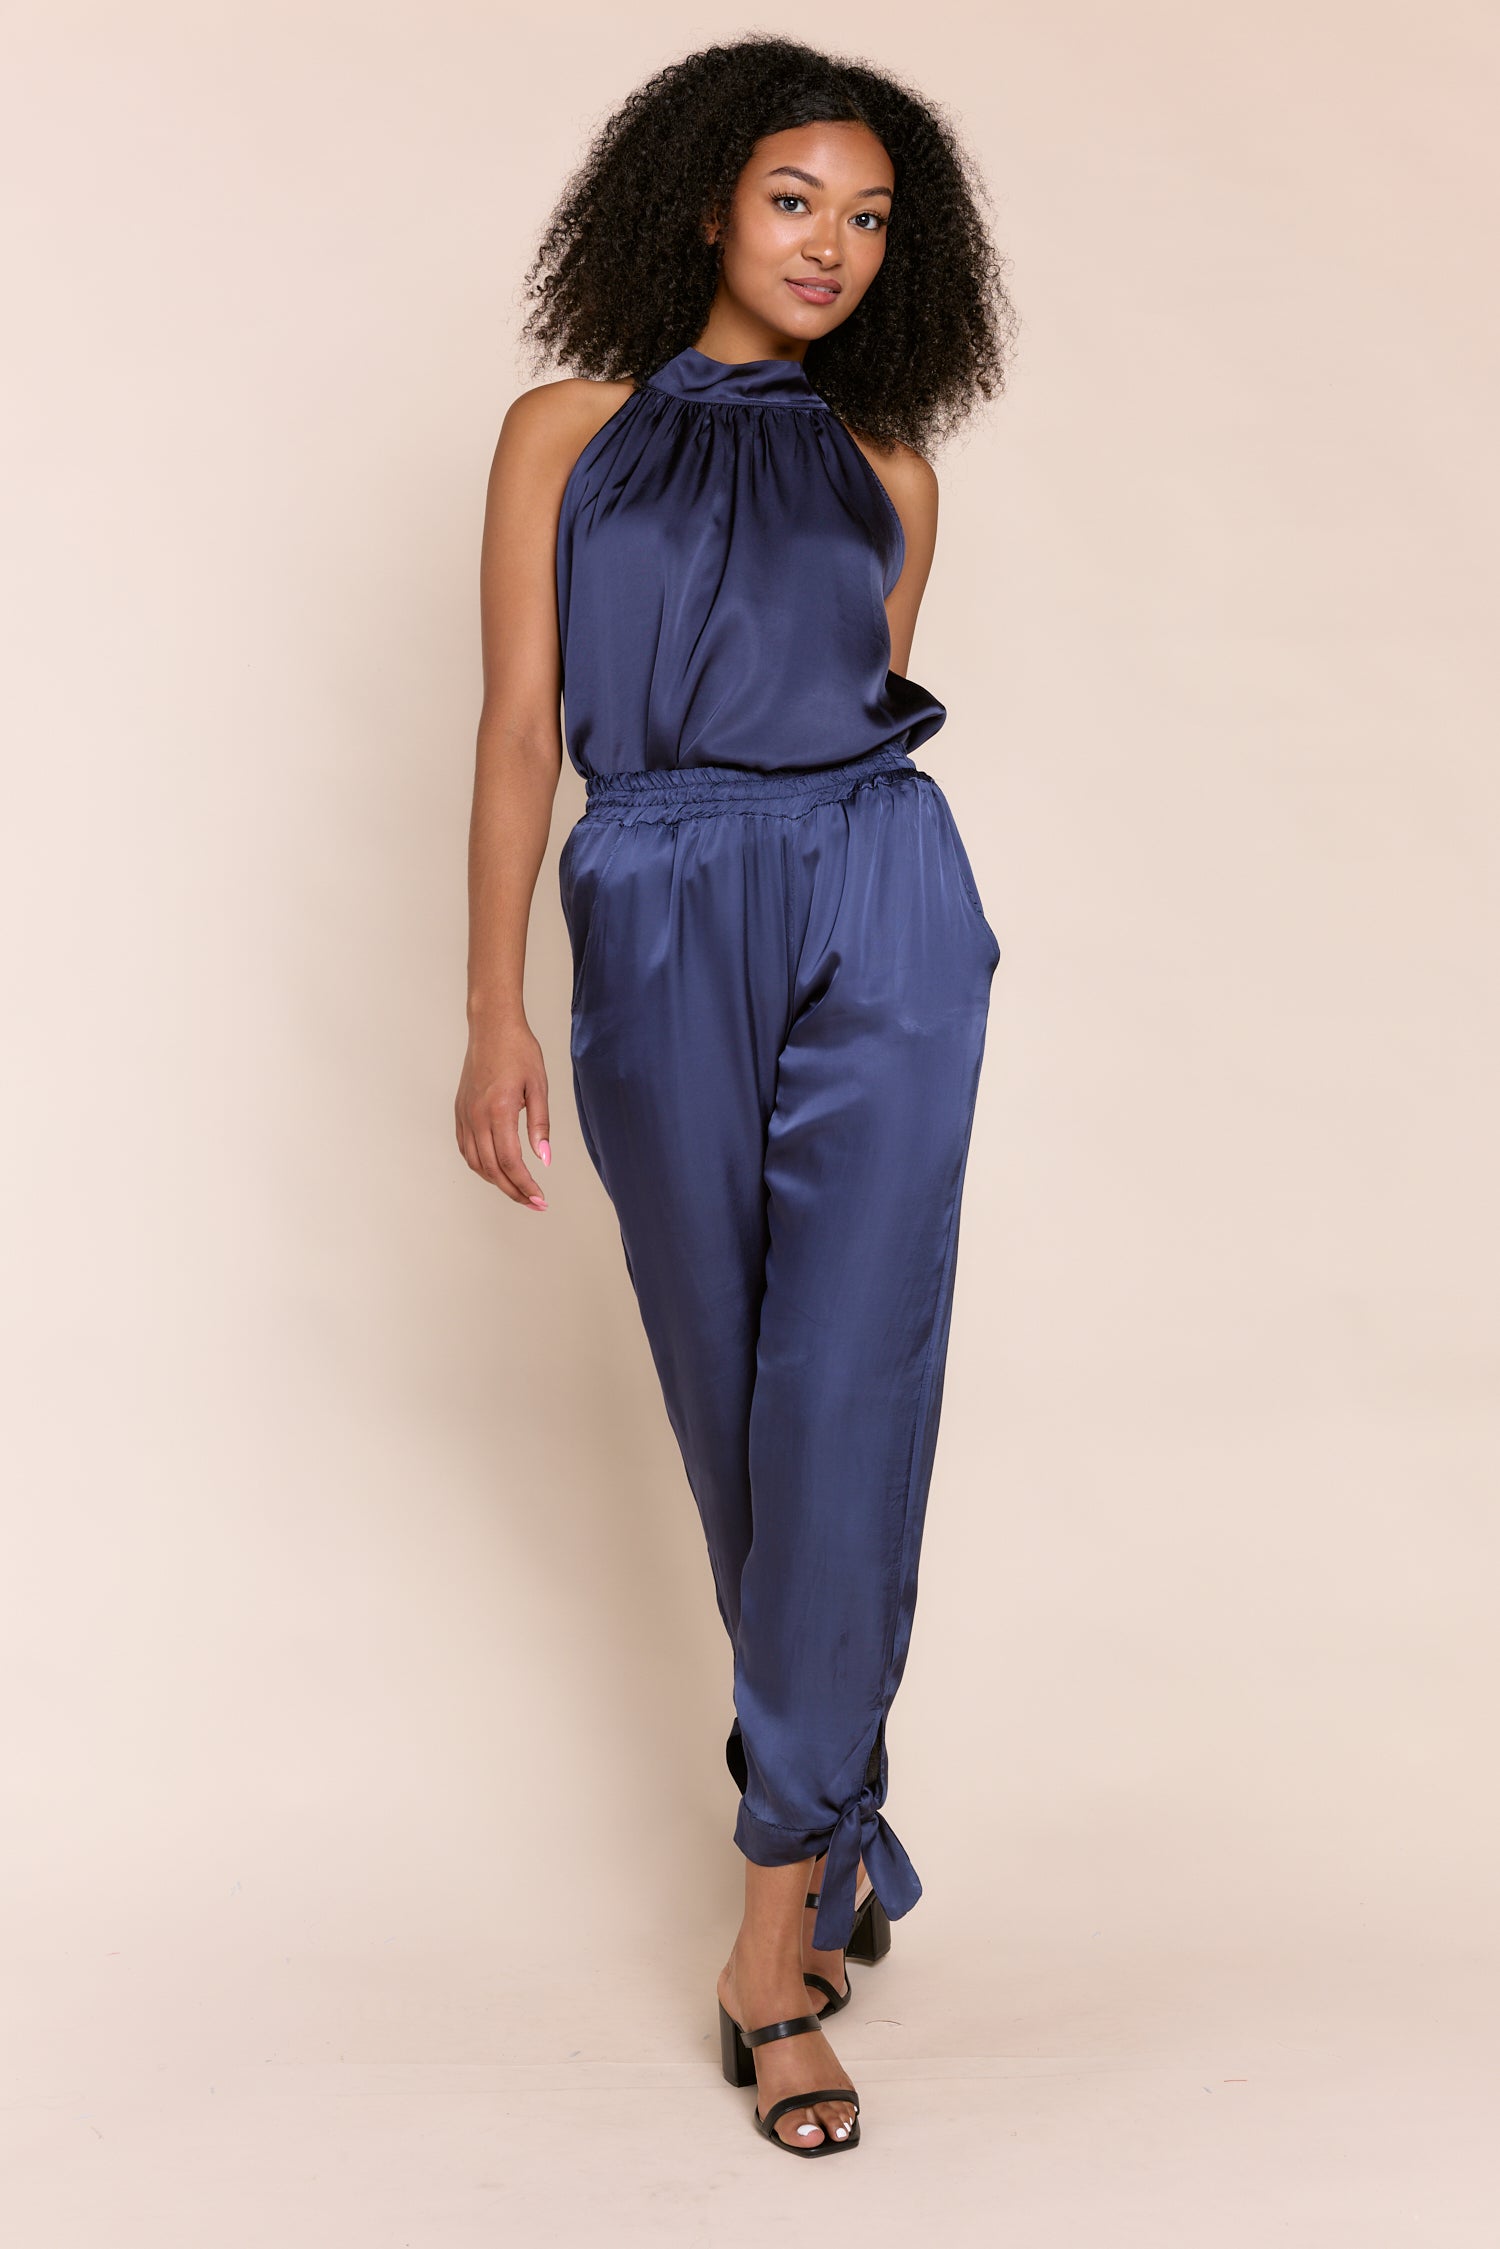 ALAIA | PANTS | BOTTOMS, Pants And Rompers, Satin, SOLIDS | shop-sofia